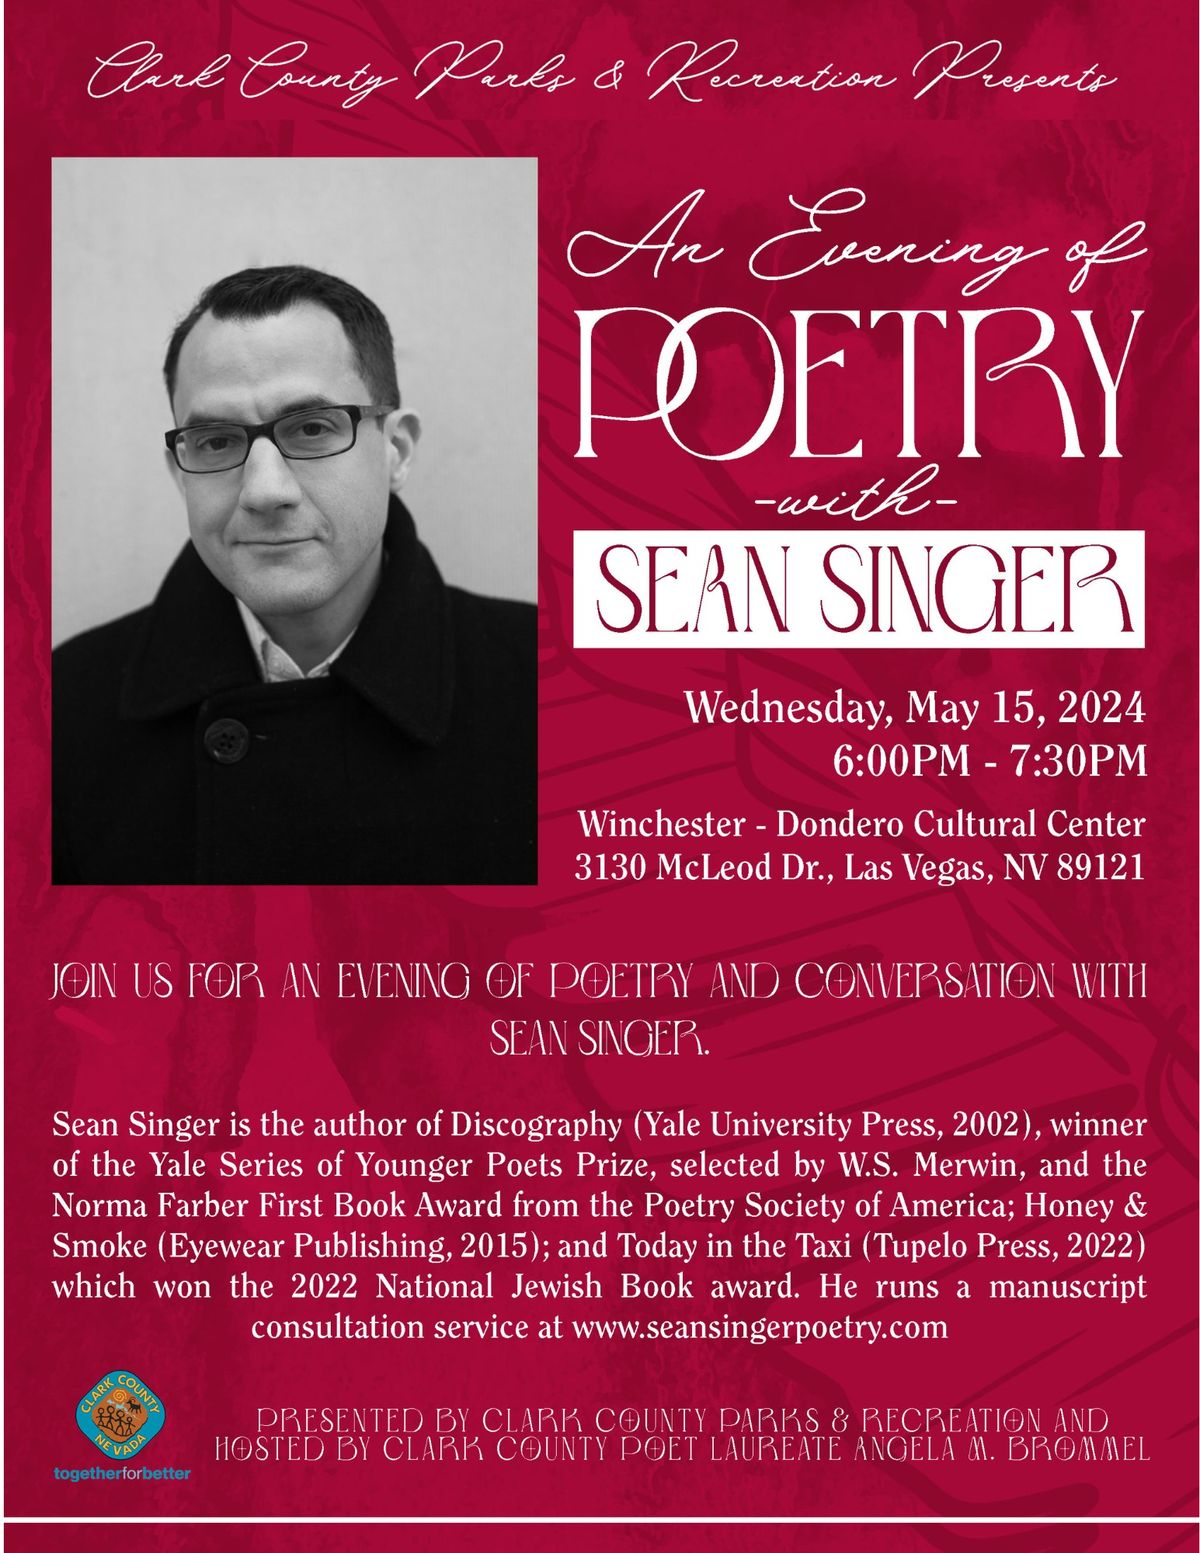 An Evening of Poetry with Sean Singer